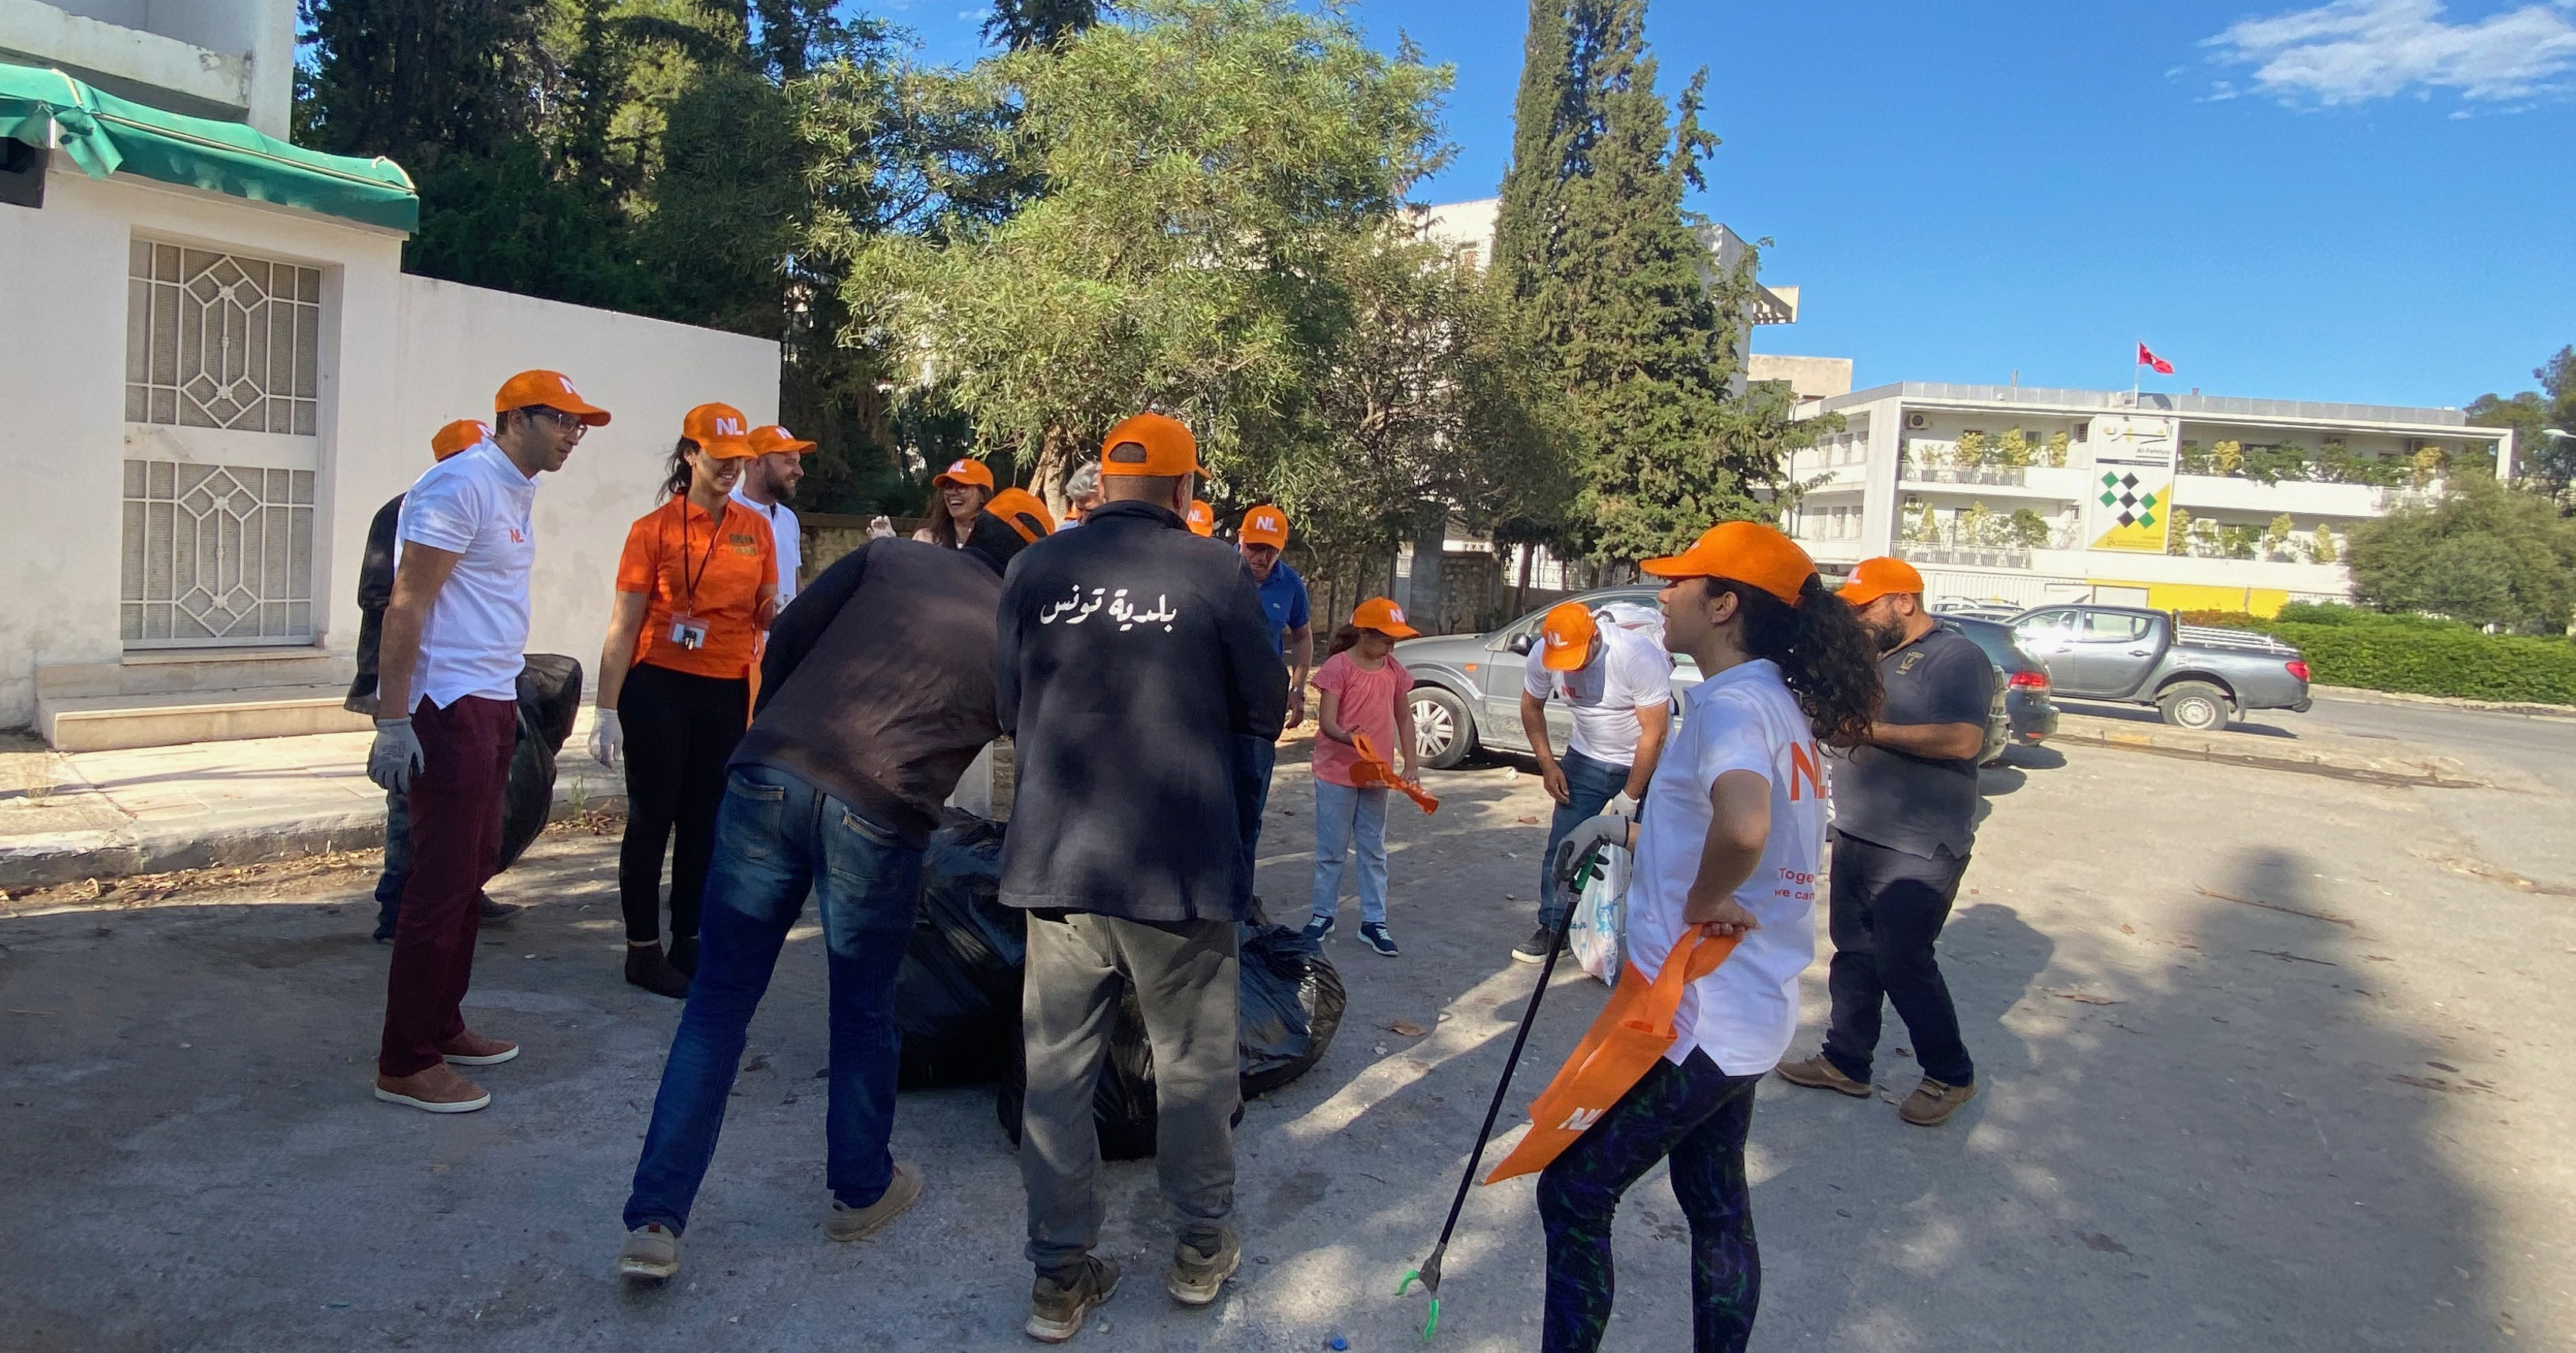 City clean up in Tunesia